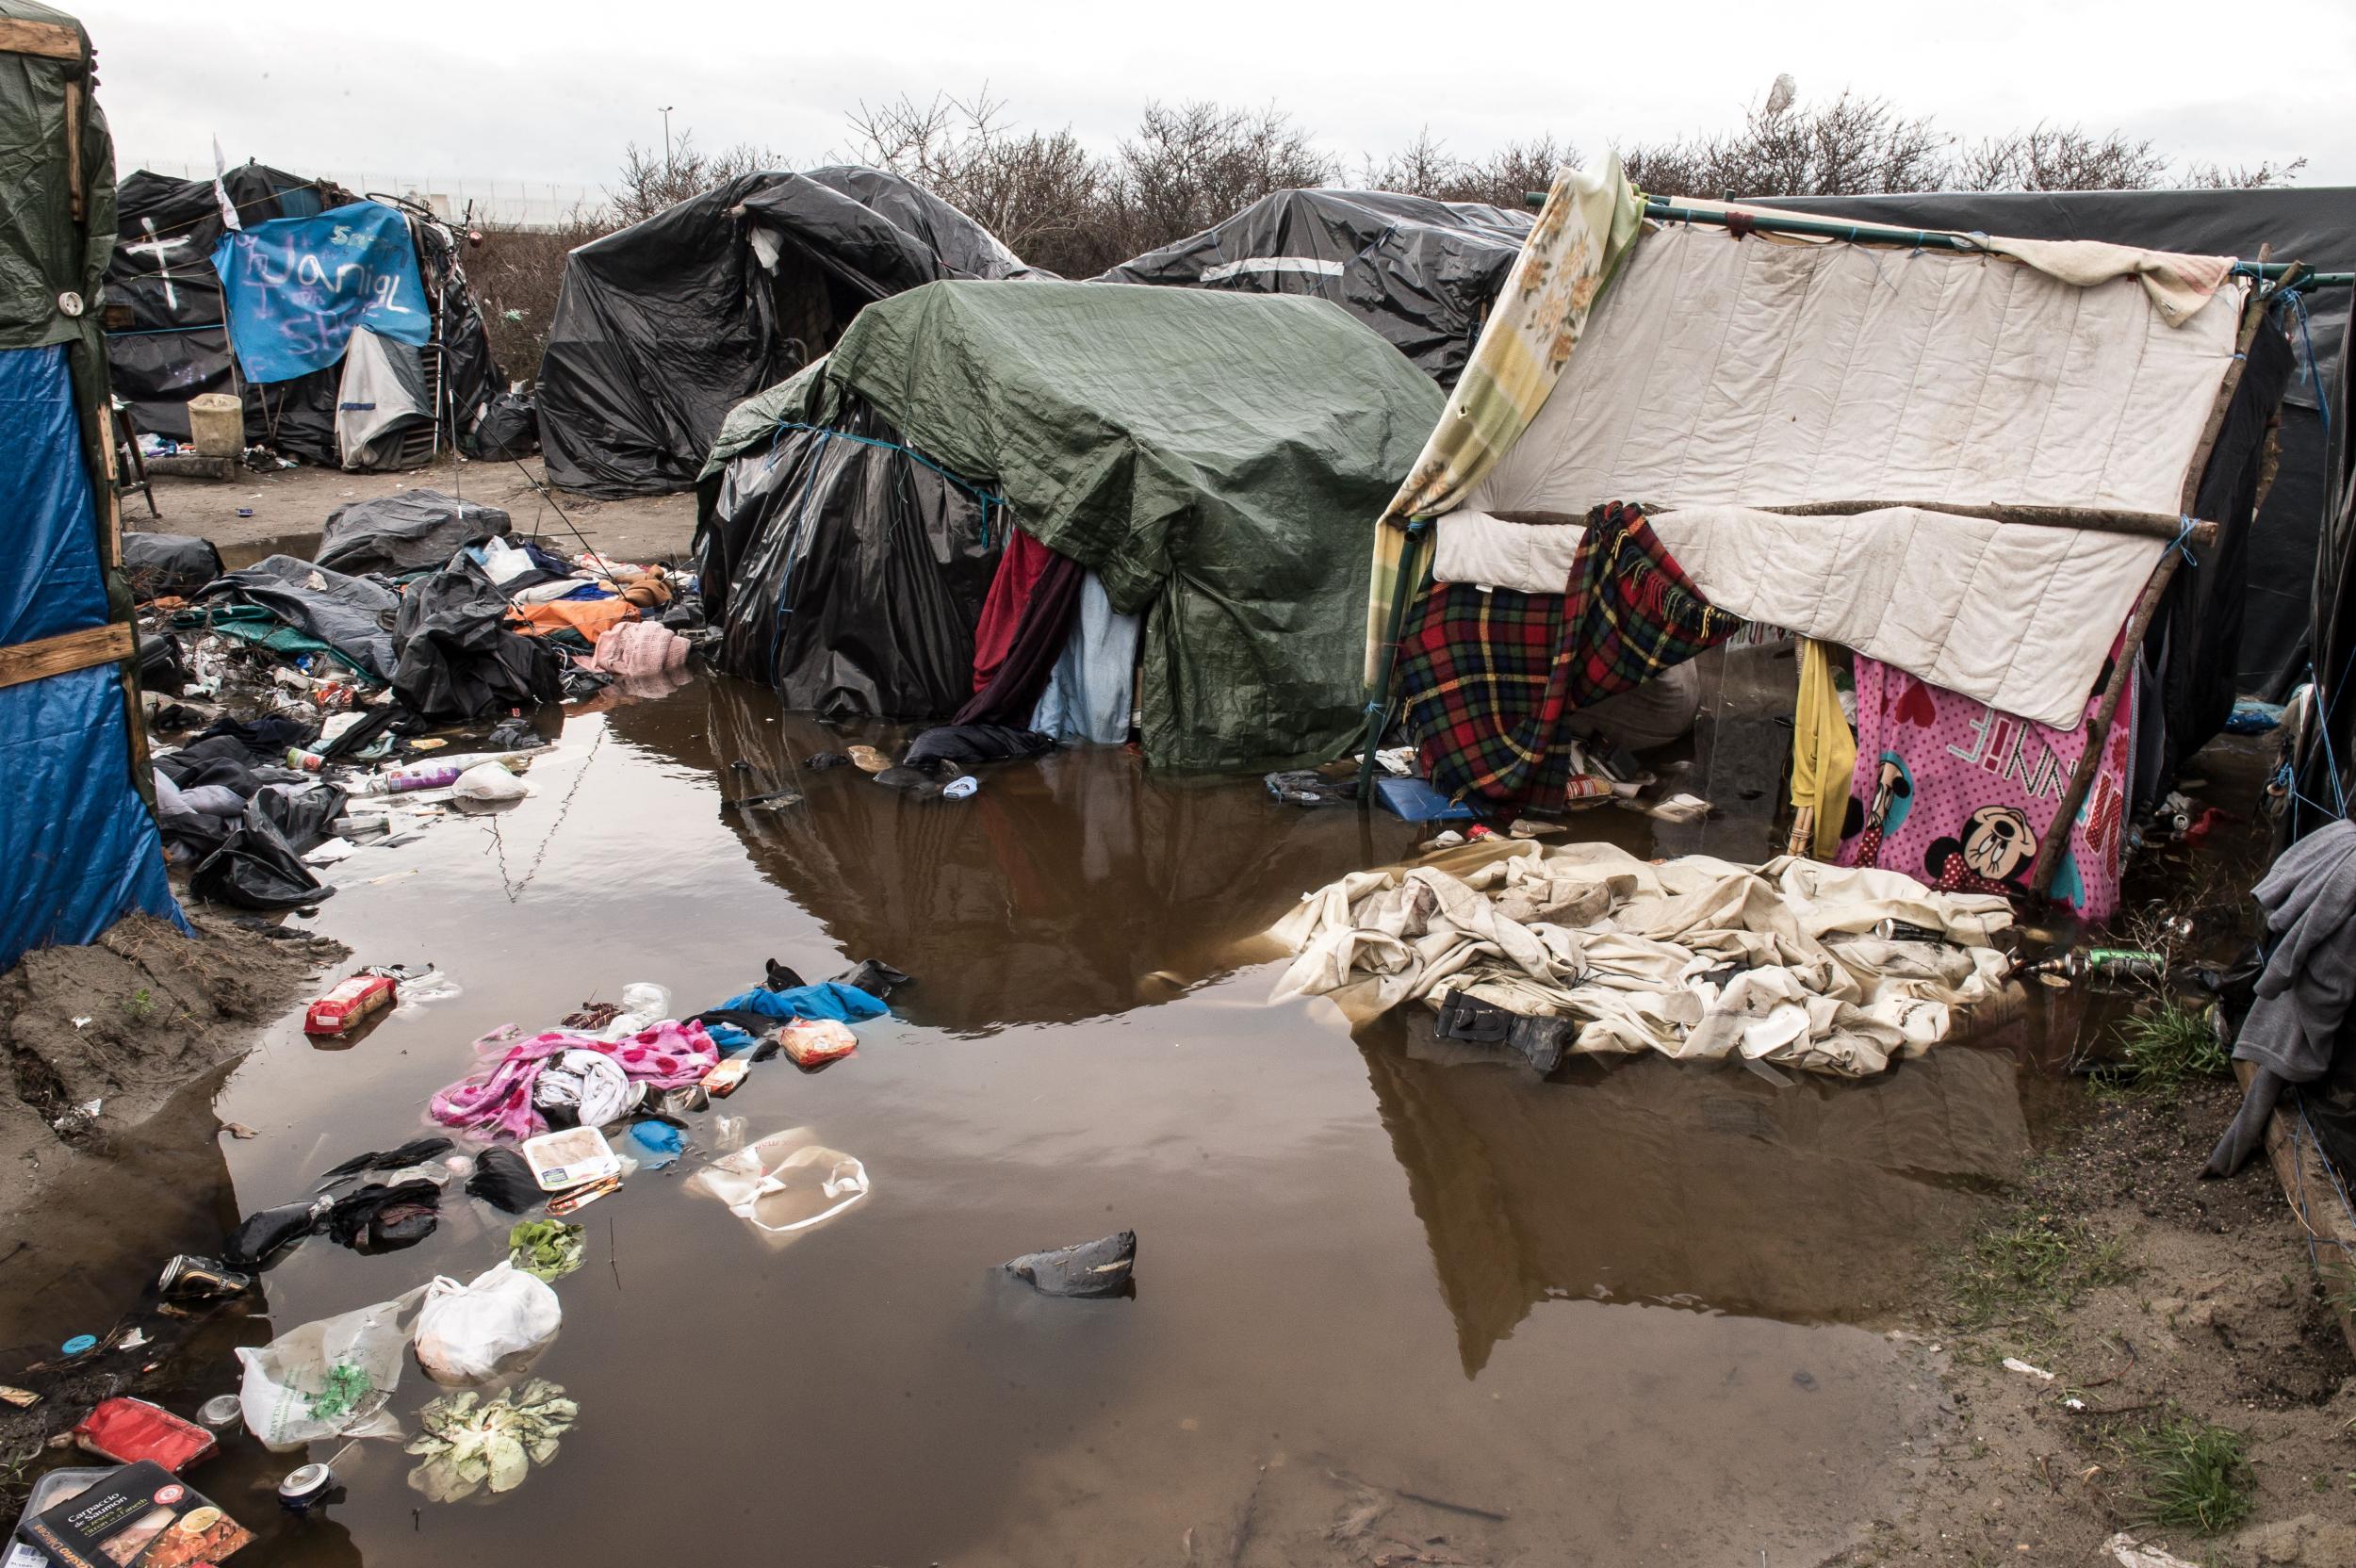 The planned demolition will half the size of the Calais Jungle